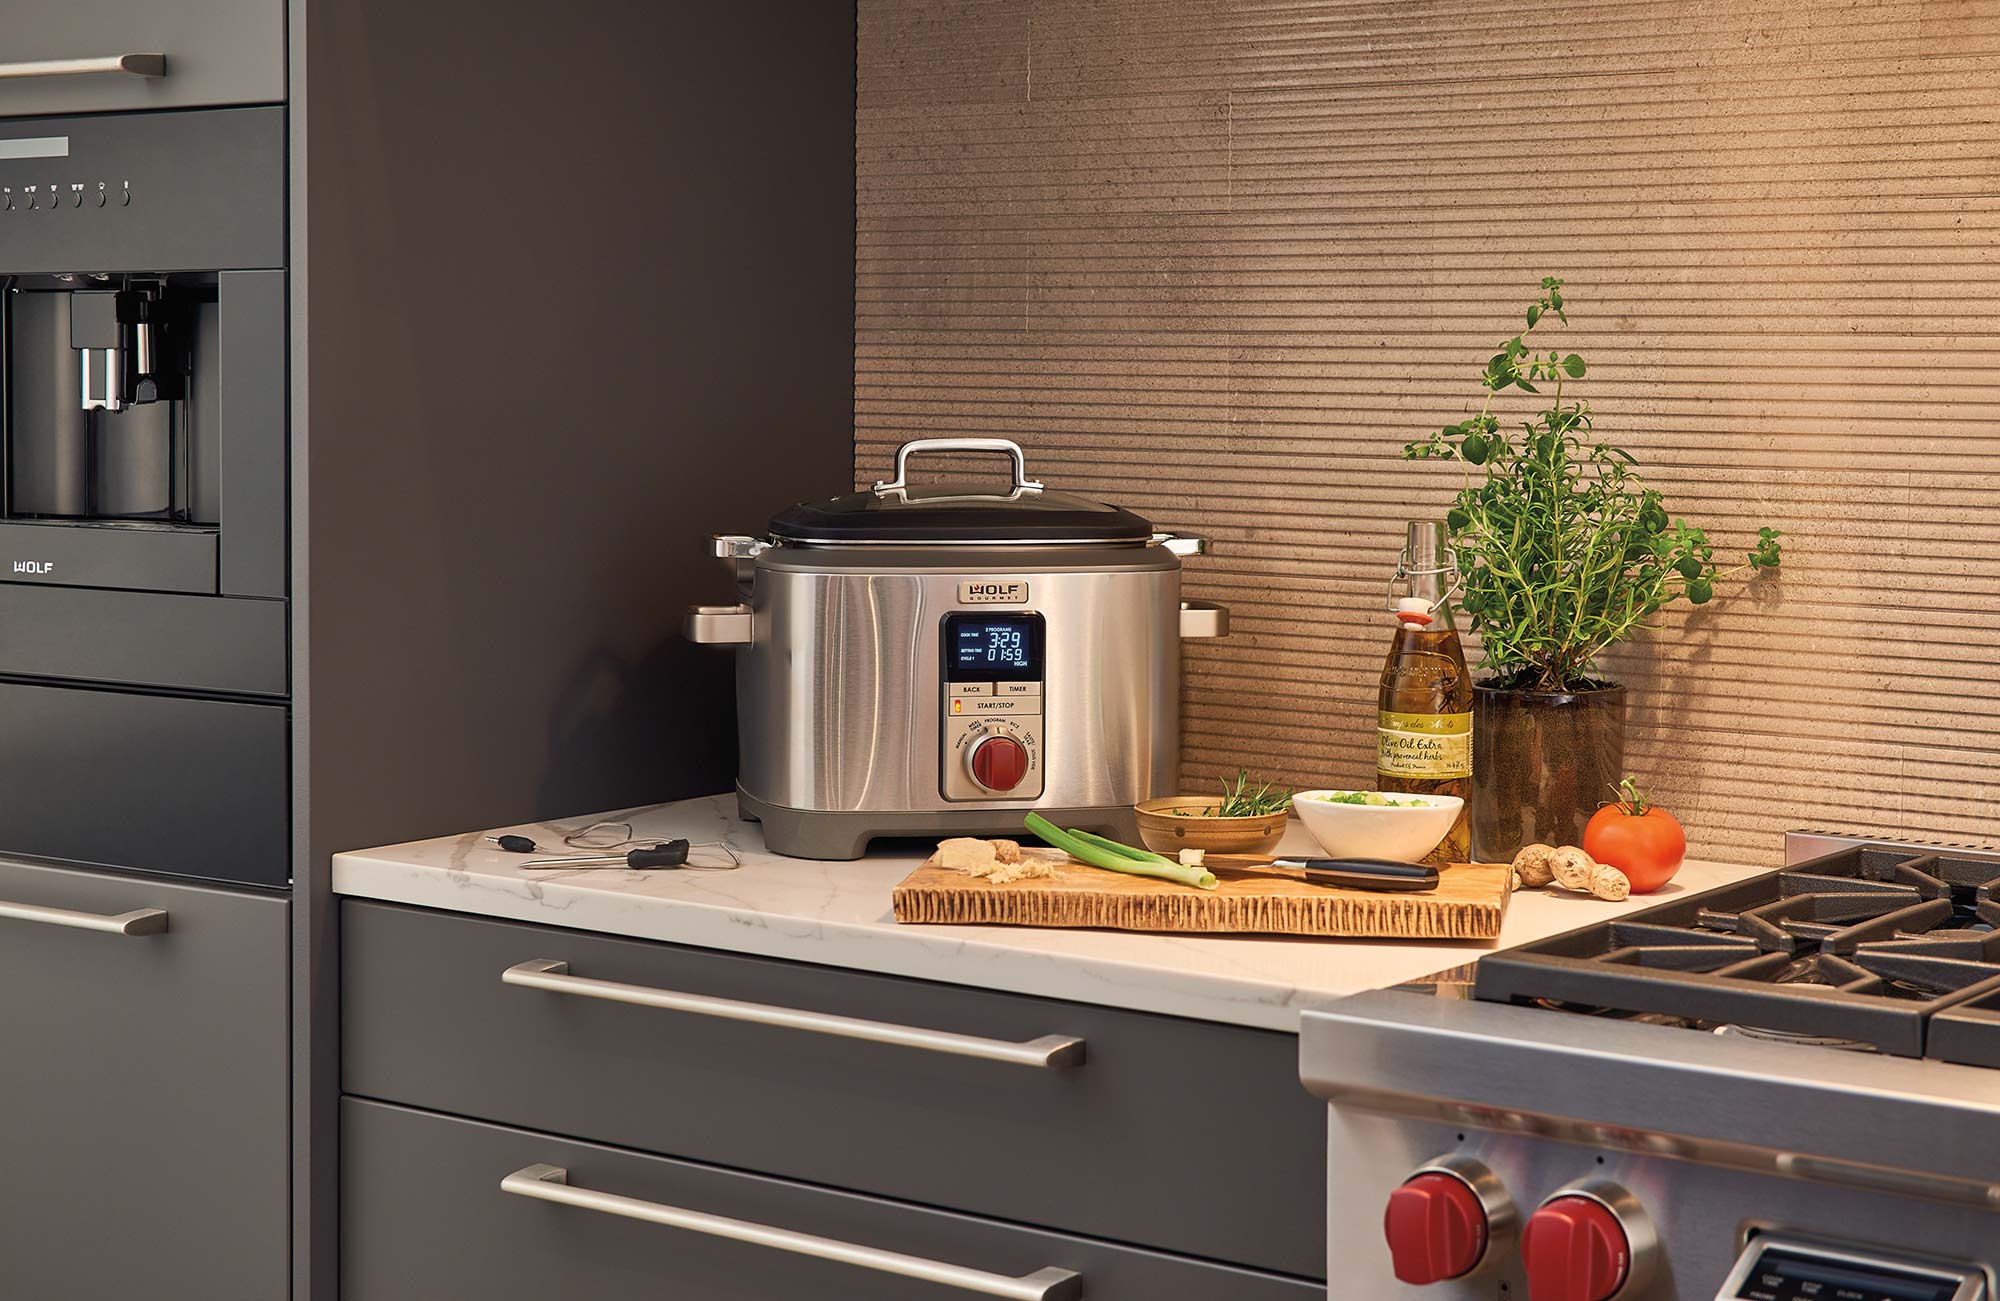 Wolf Gourmet Multi-Function Cooker